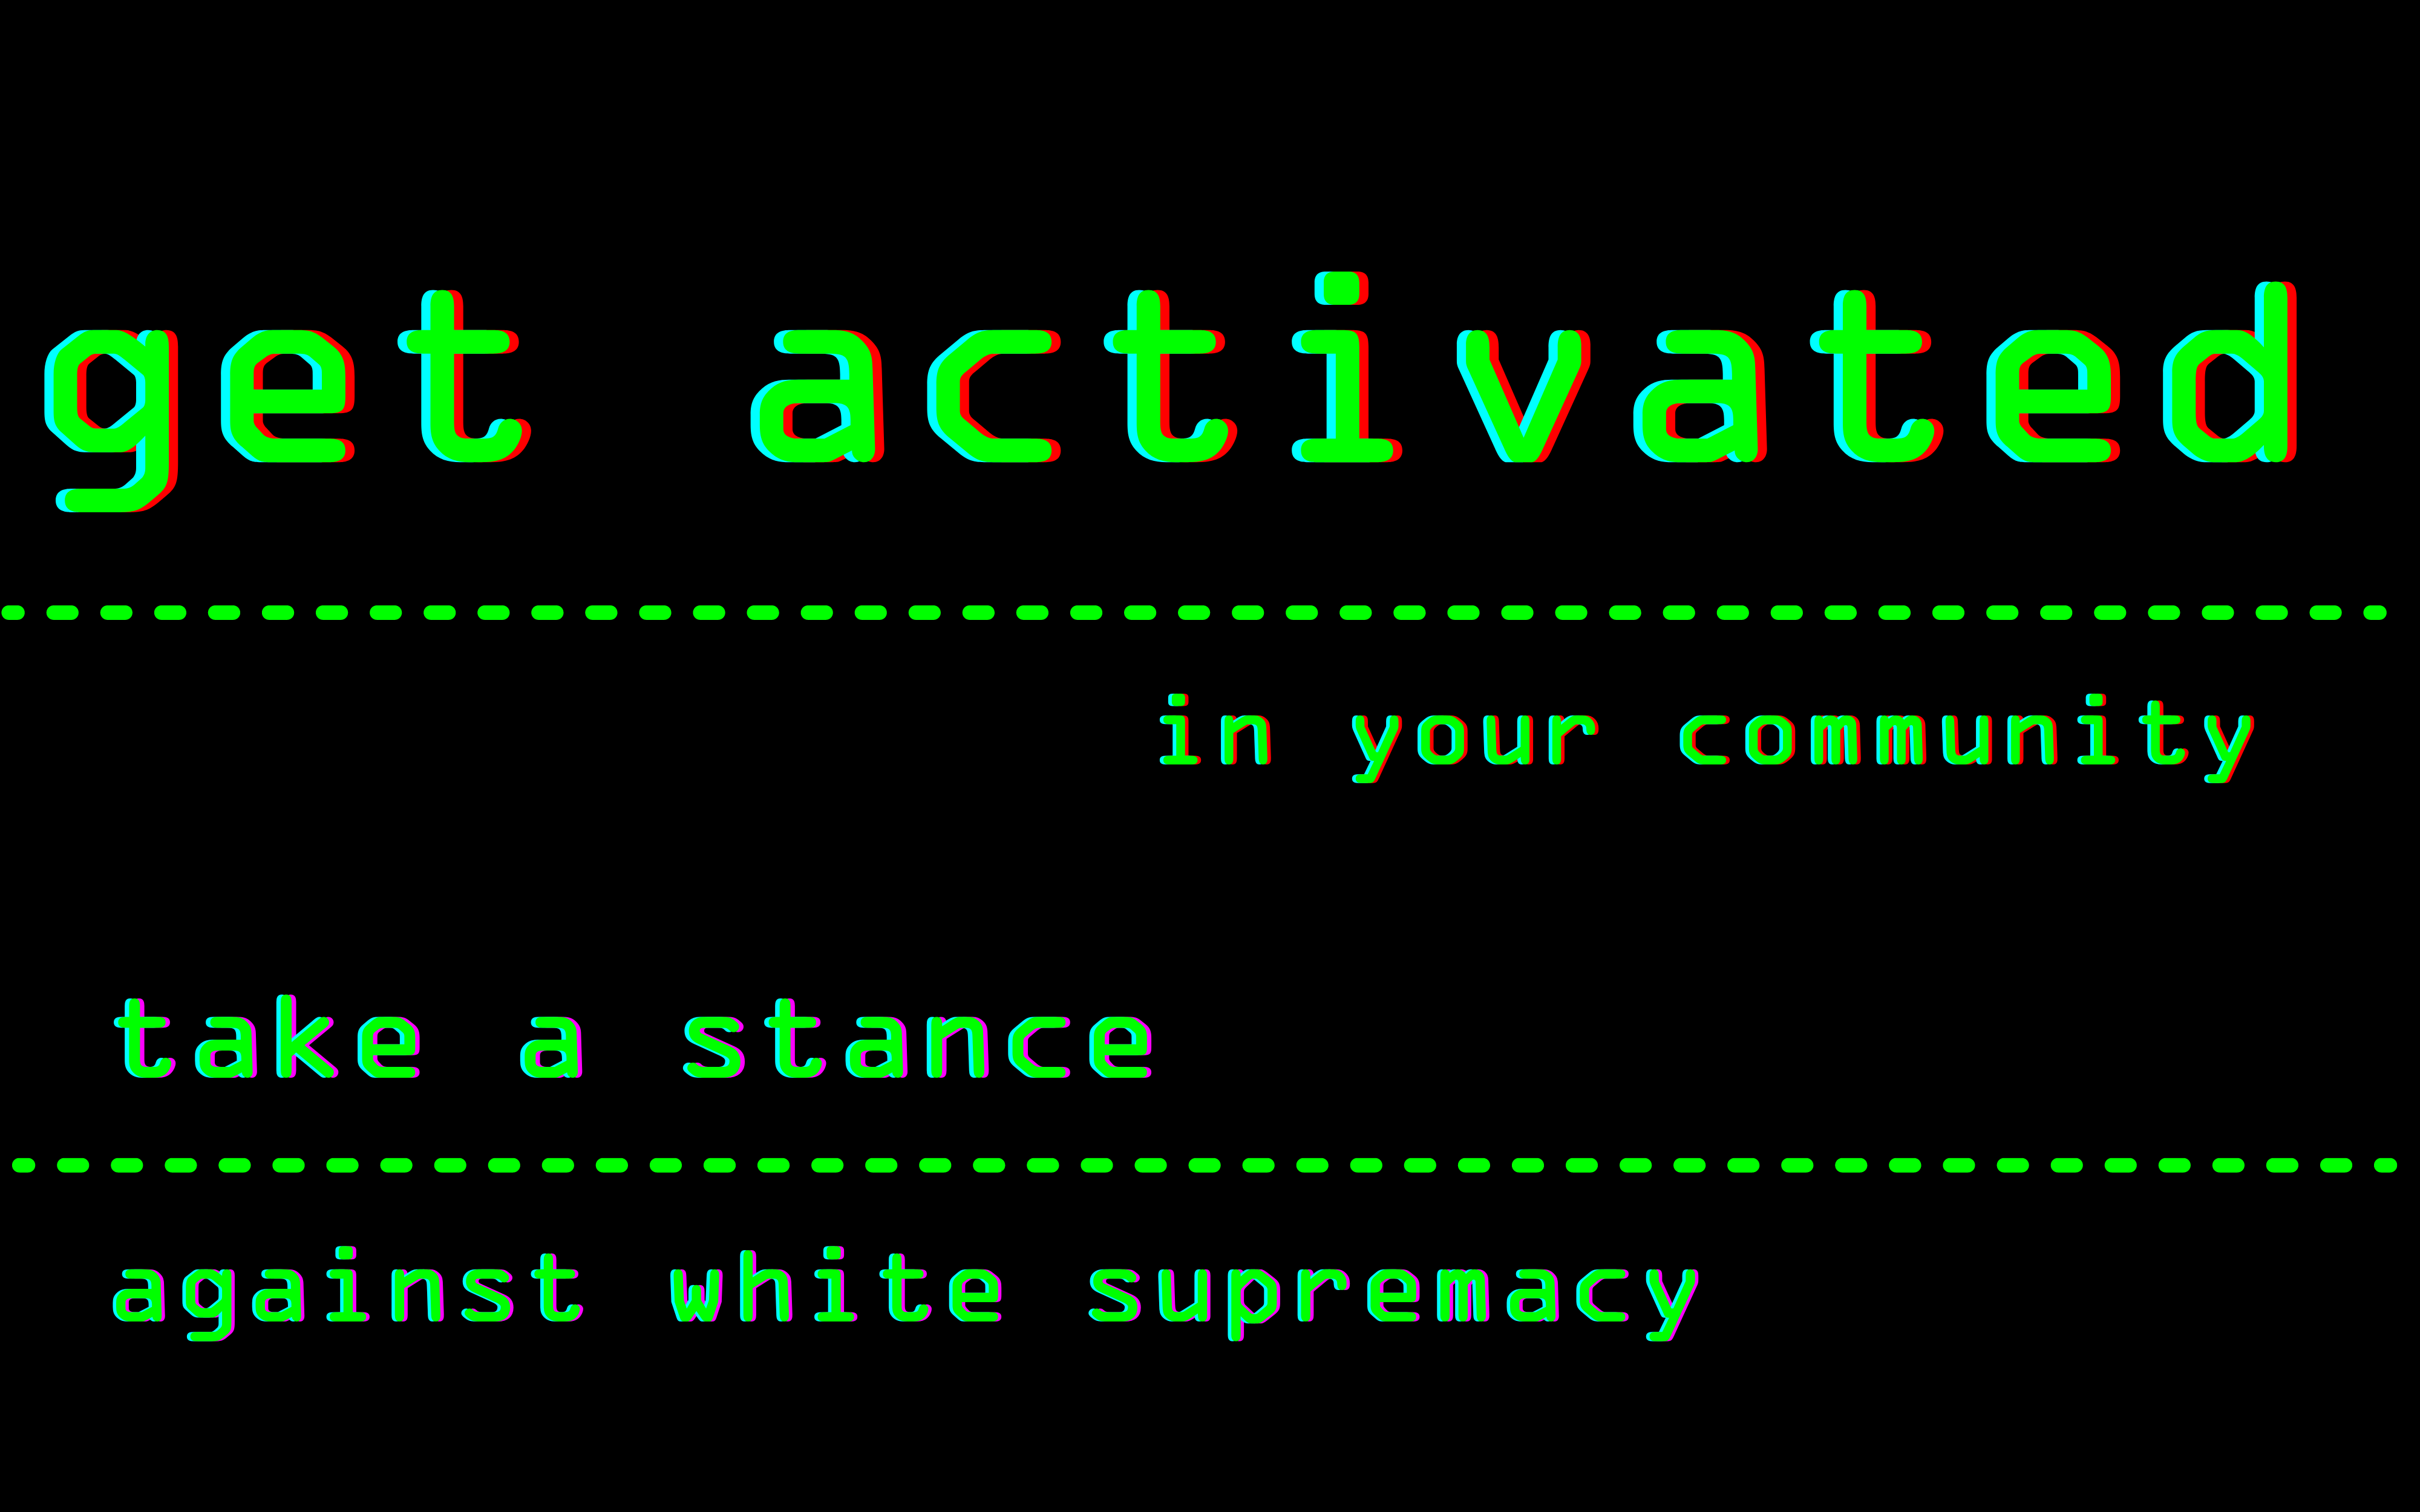 activated against white supremacy